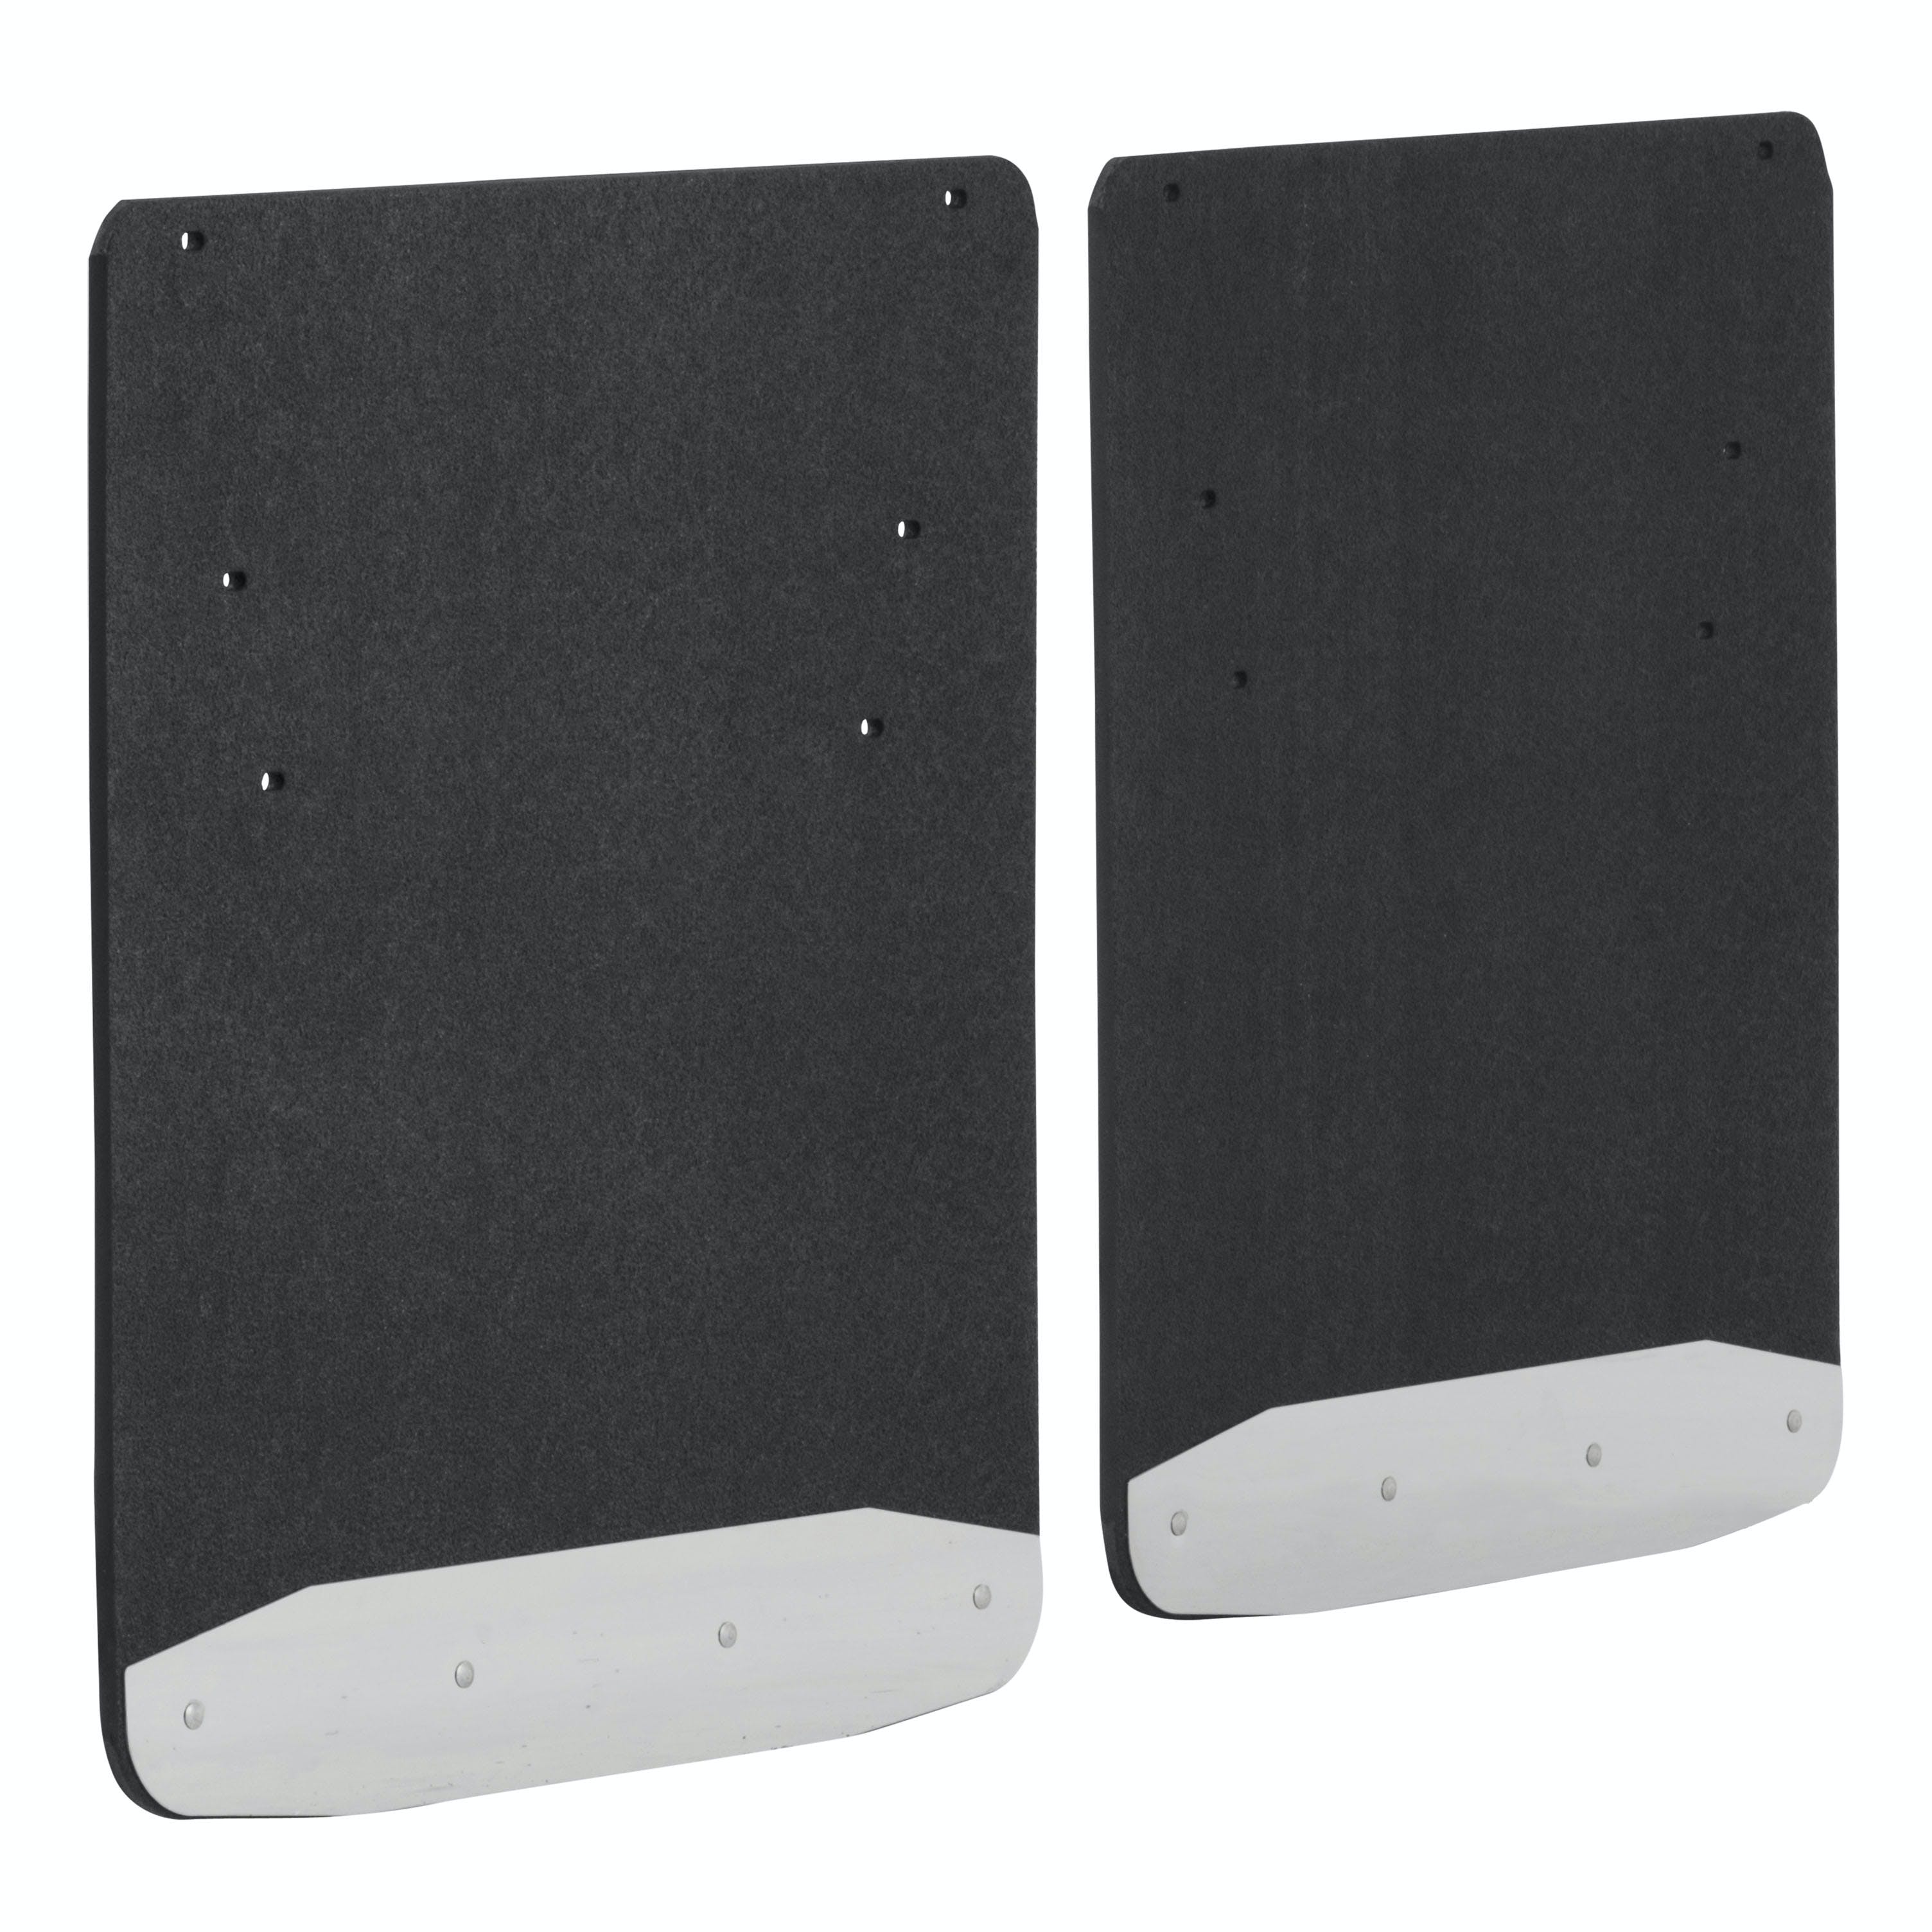 LUVERNE 251034 Textured Rubber Mud Guards